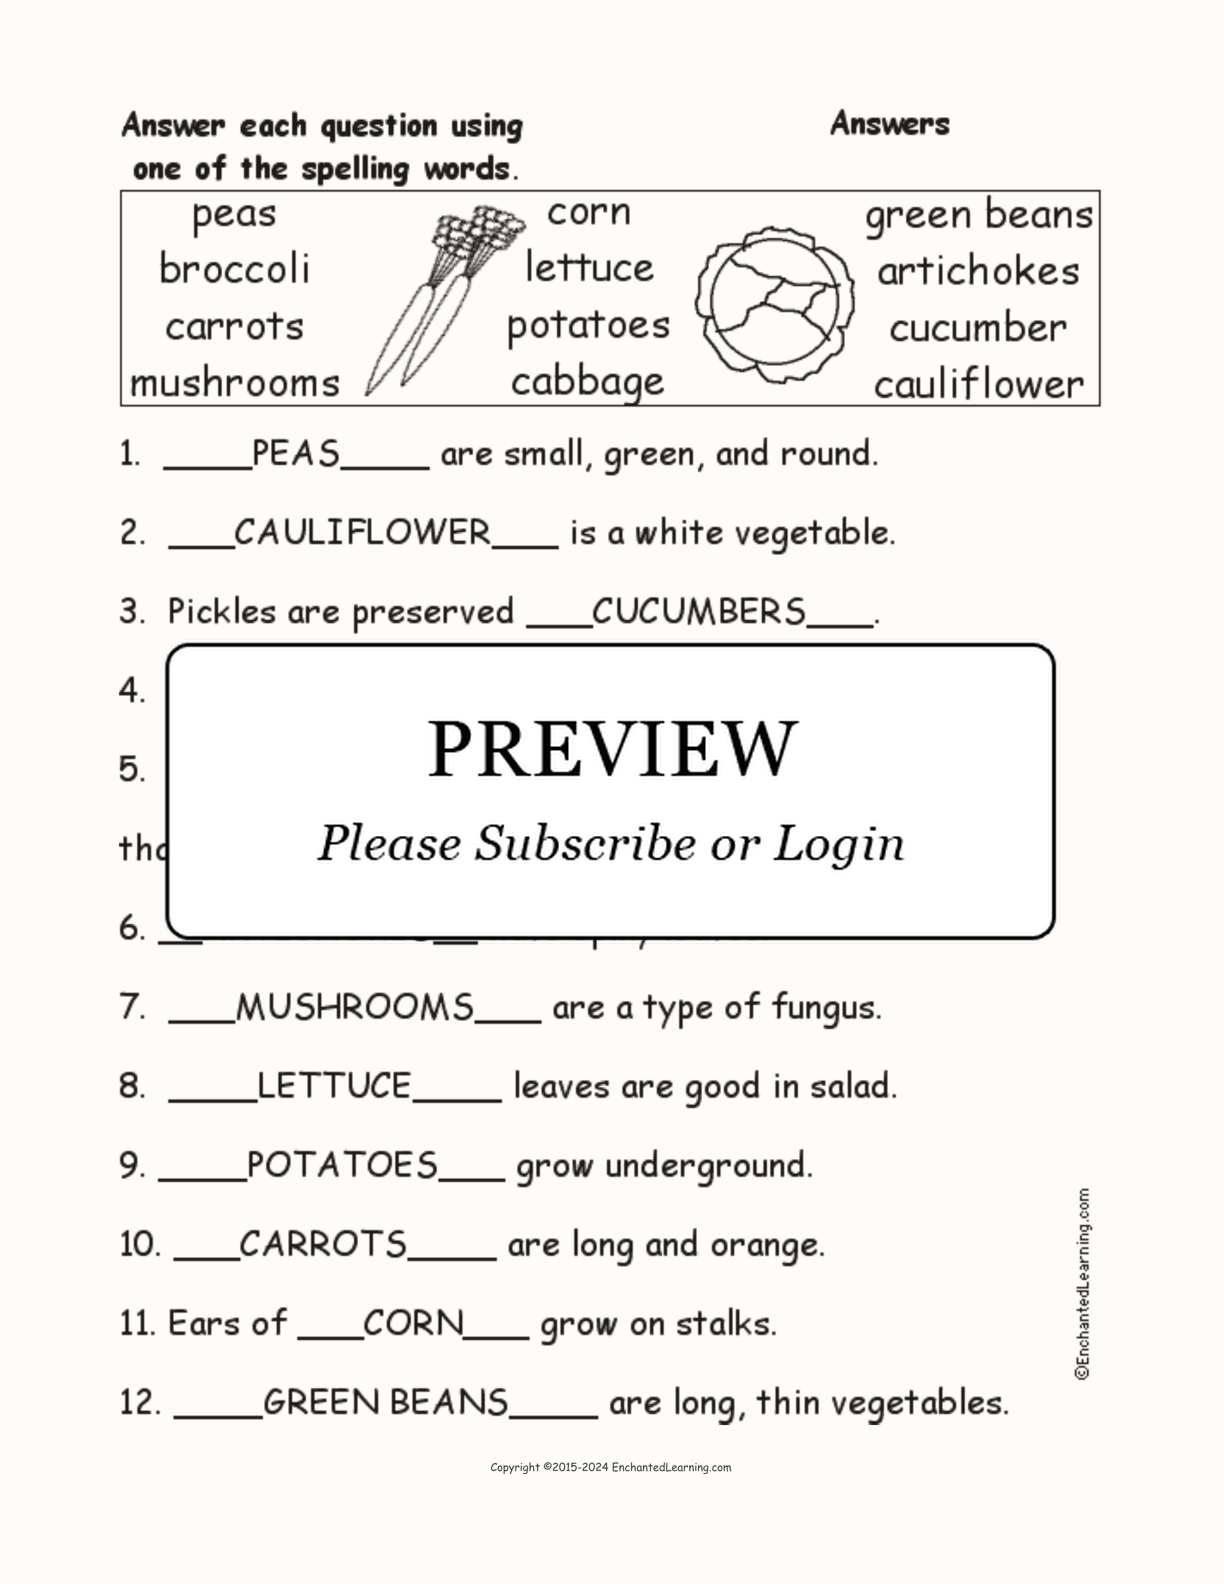 Vegetables Spelling Word Questions interactive worksheet page 2